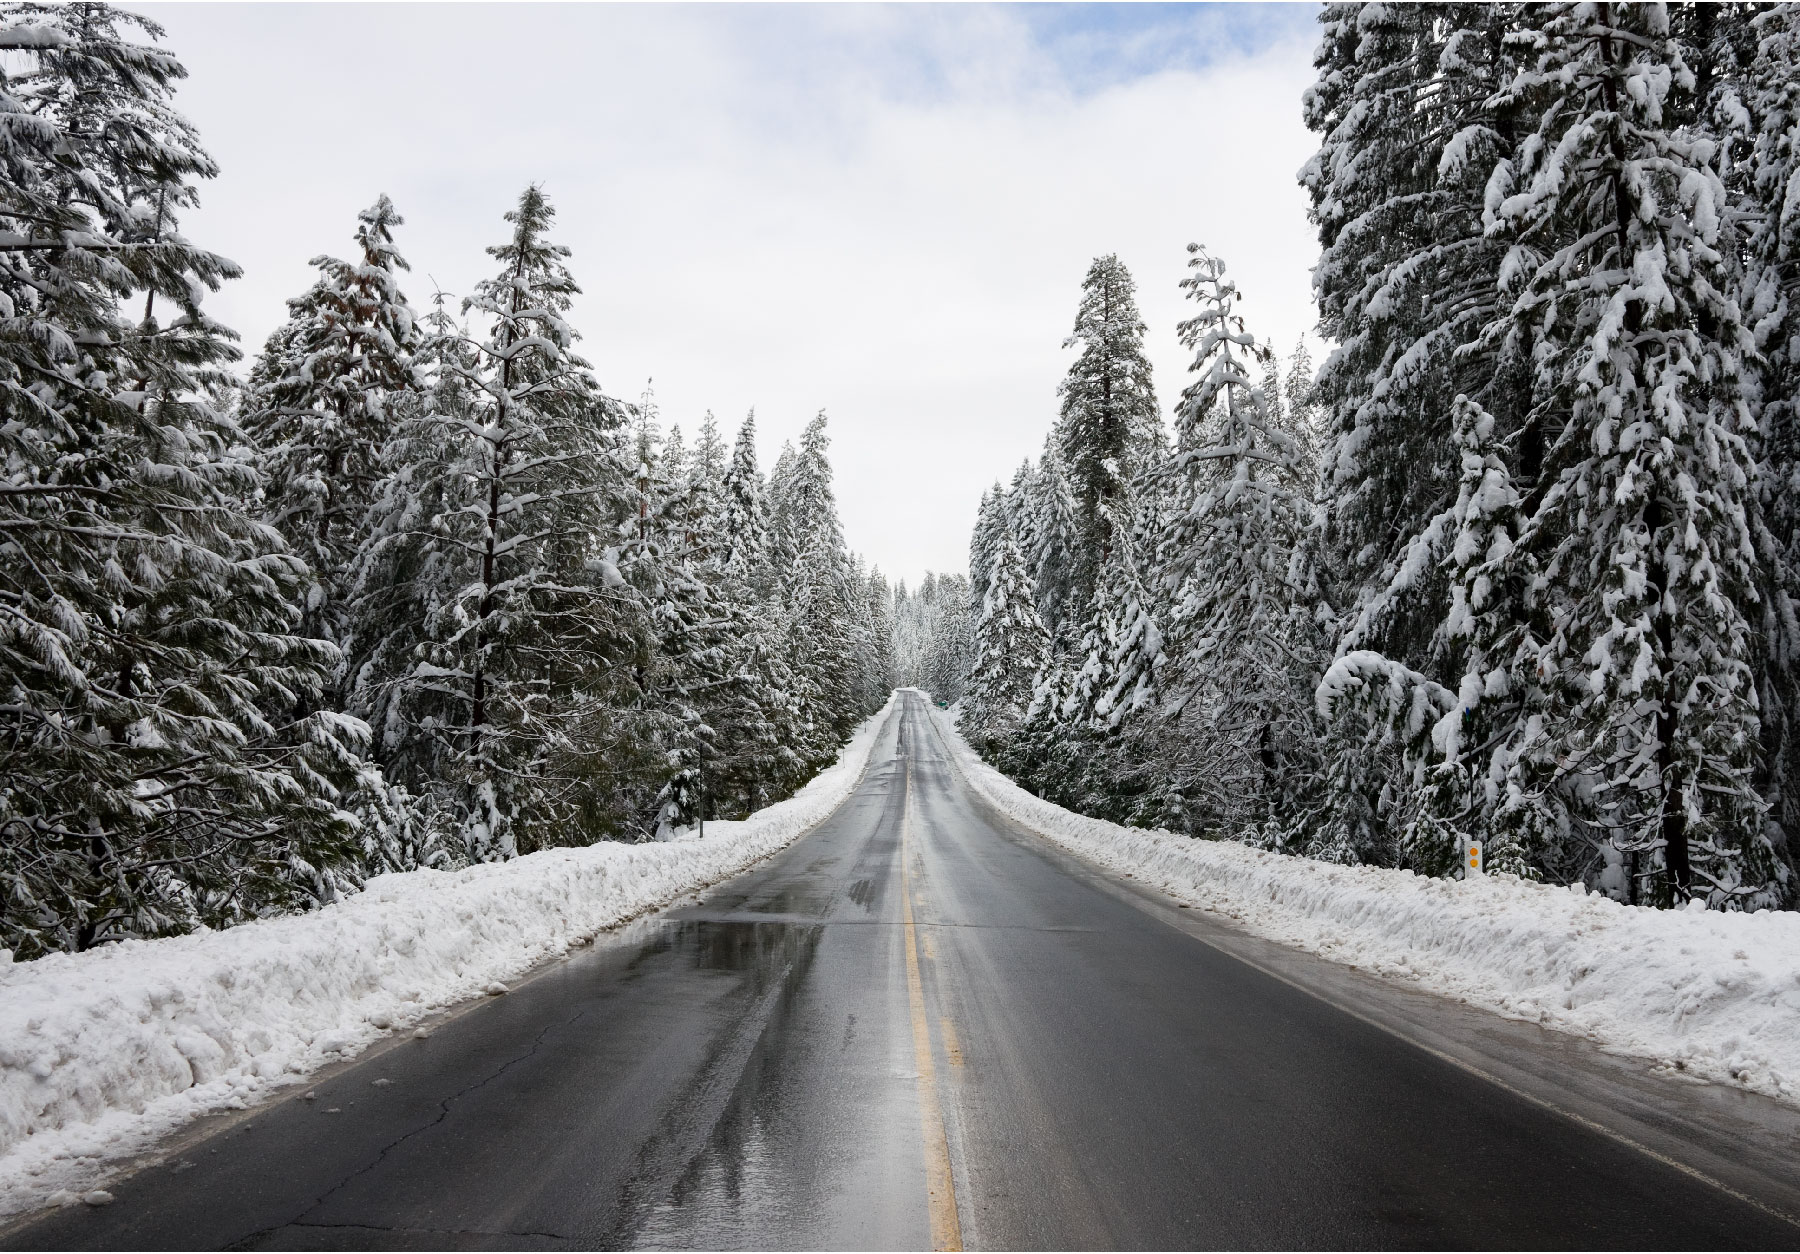 A dark icy road cutting through a forest of towering snow-laden pine trees with deep snowbanks on both sides under a pale winter sky